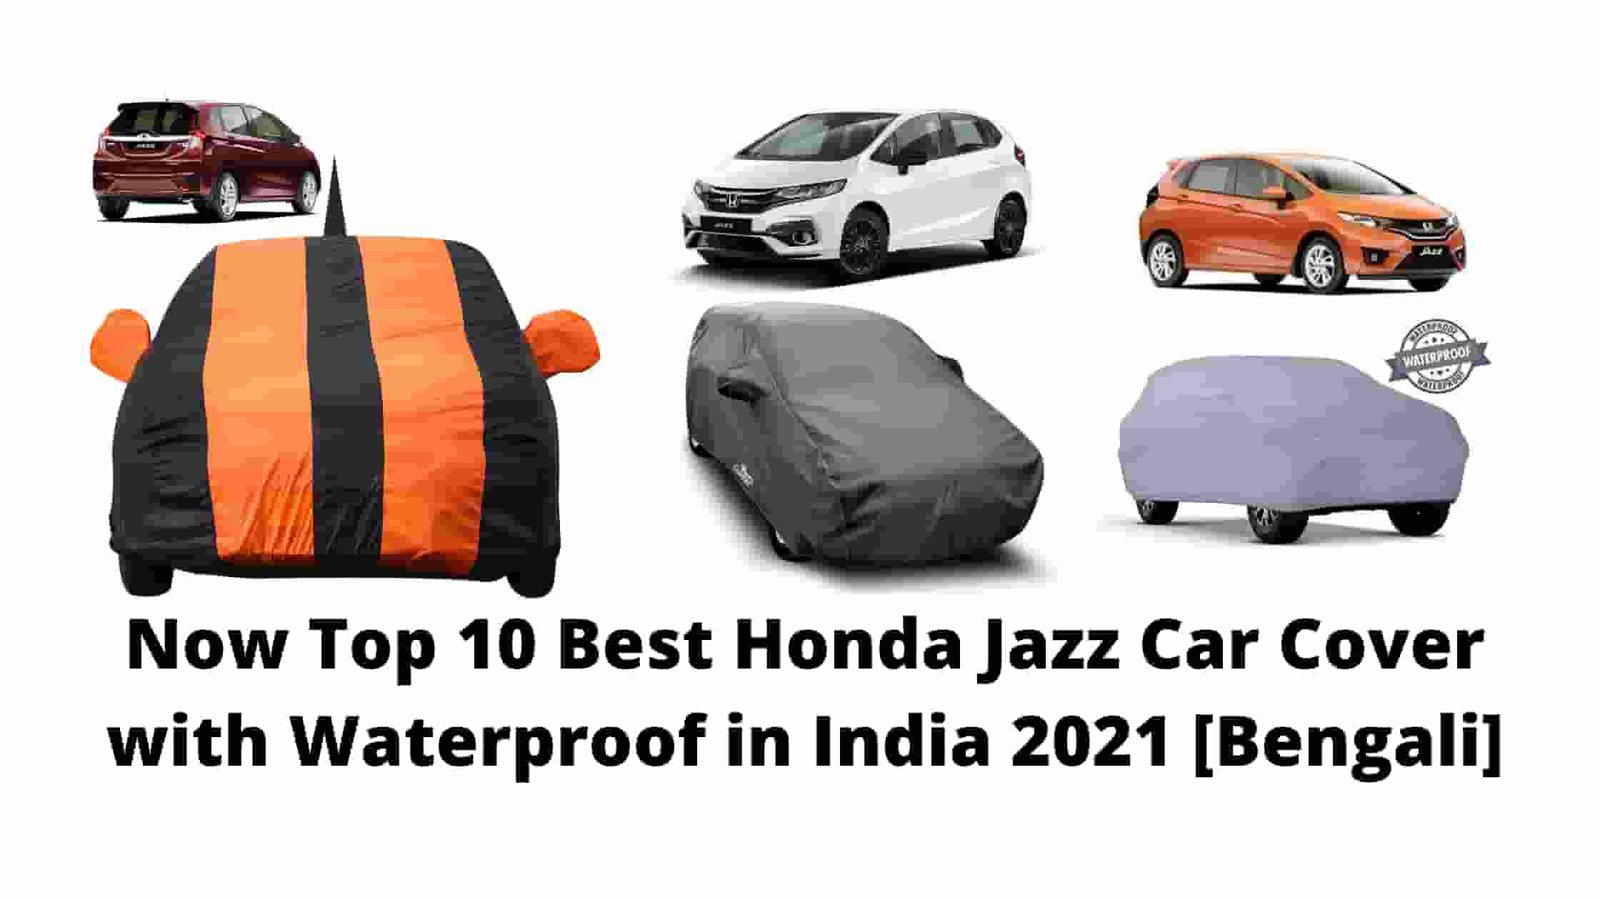 Now Top 10 Best Honda Jazz Car Cover with Waterproof in India 2021 [Bengali]